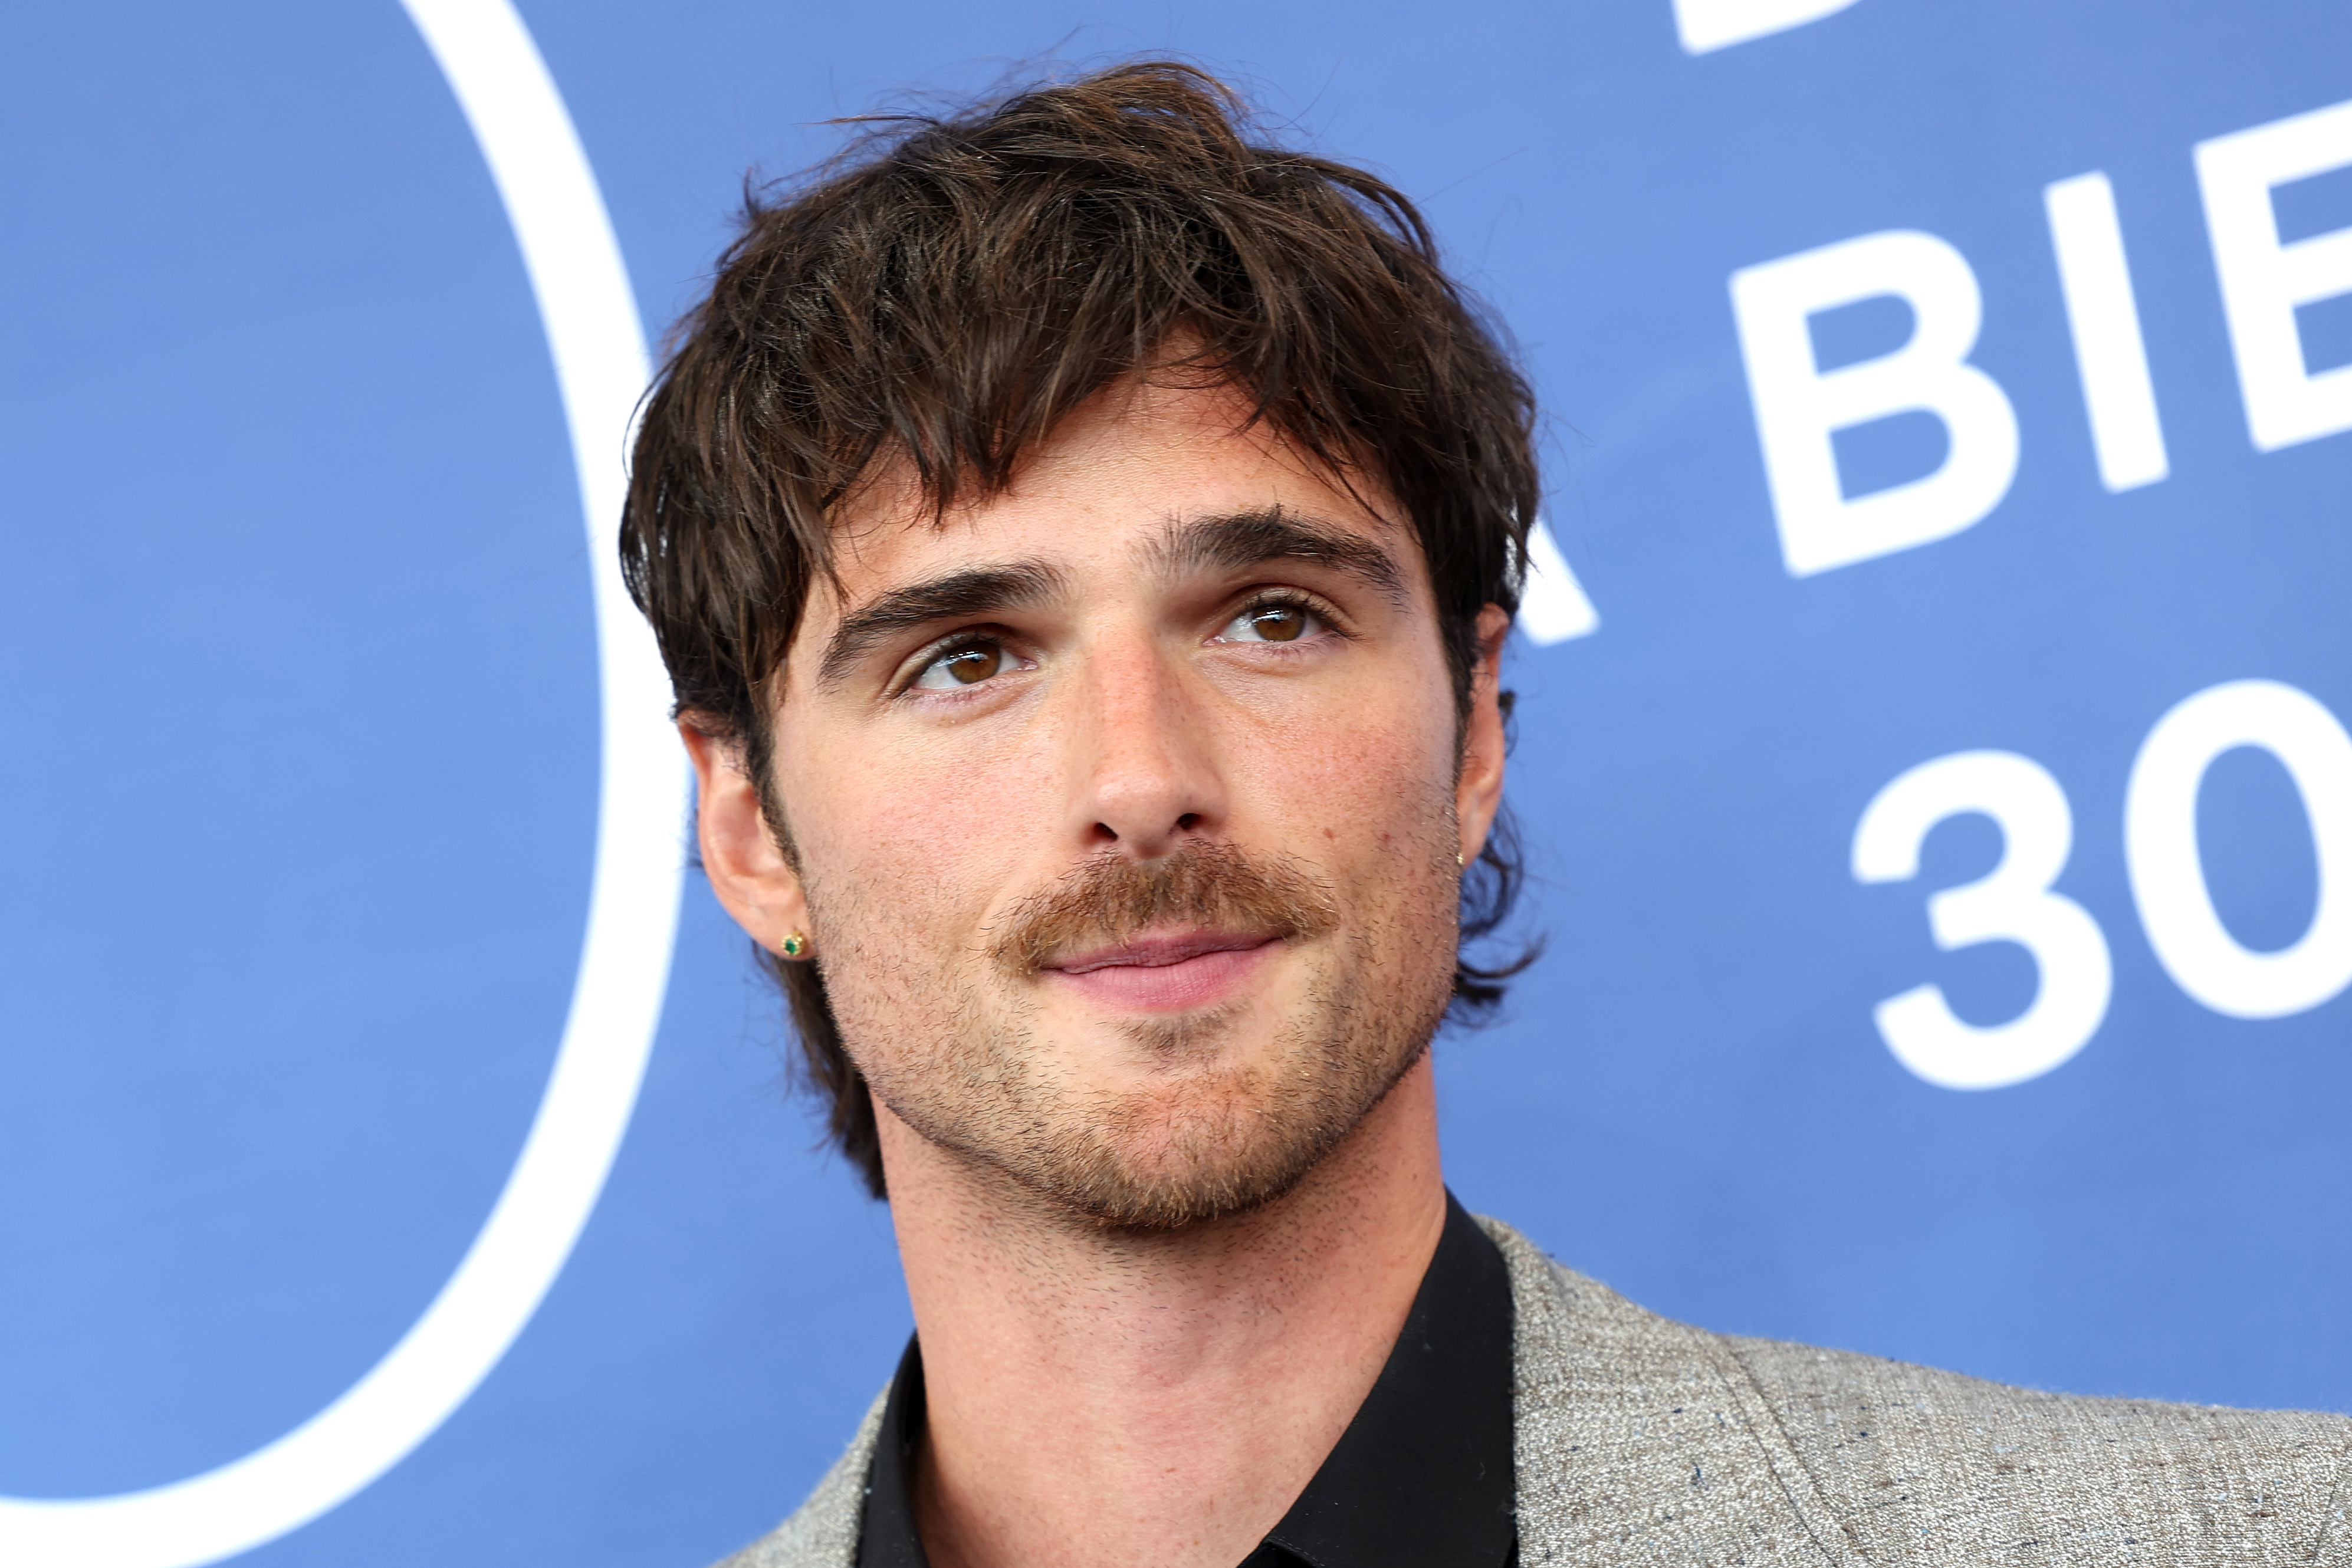 A close-up of Jacob with a mustache at a media event